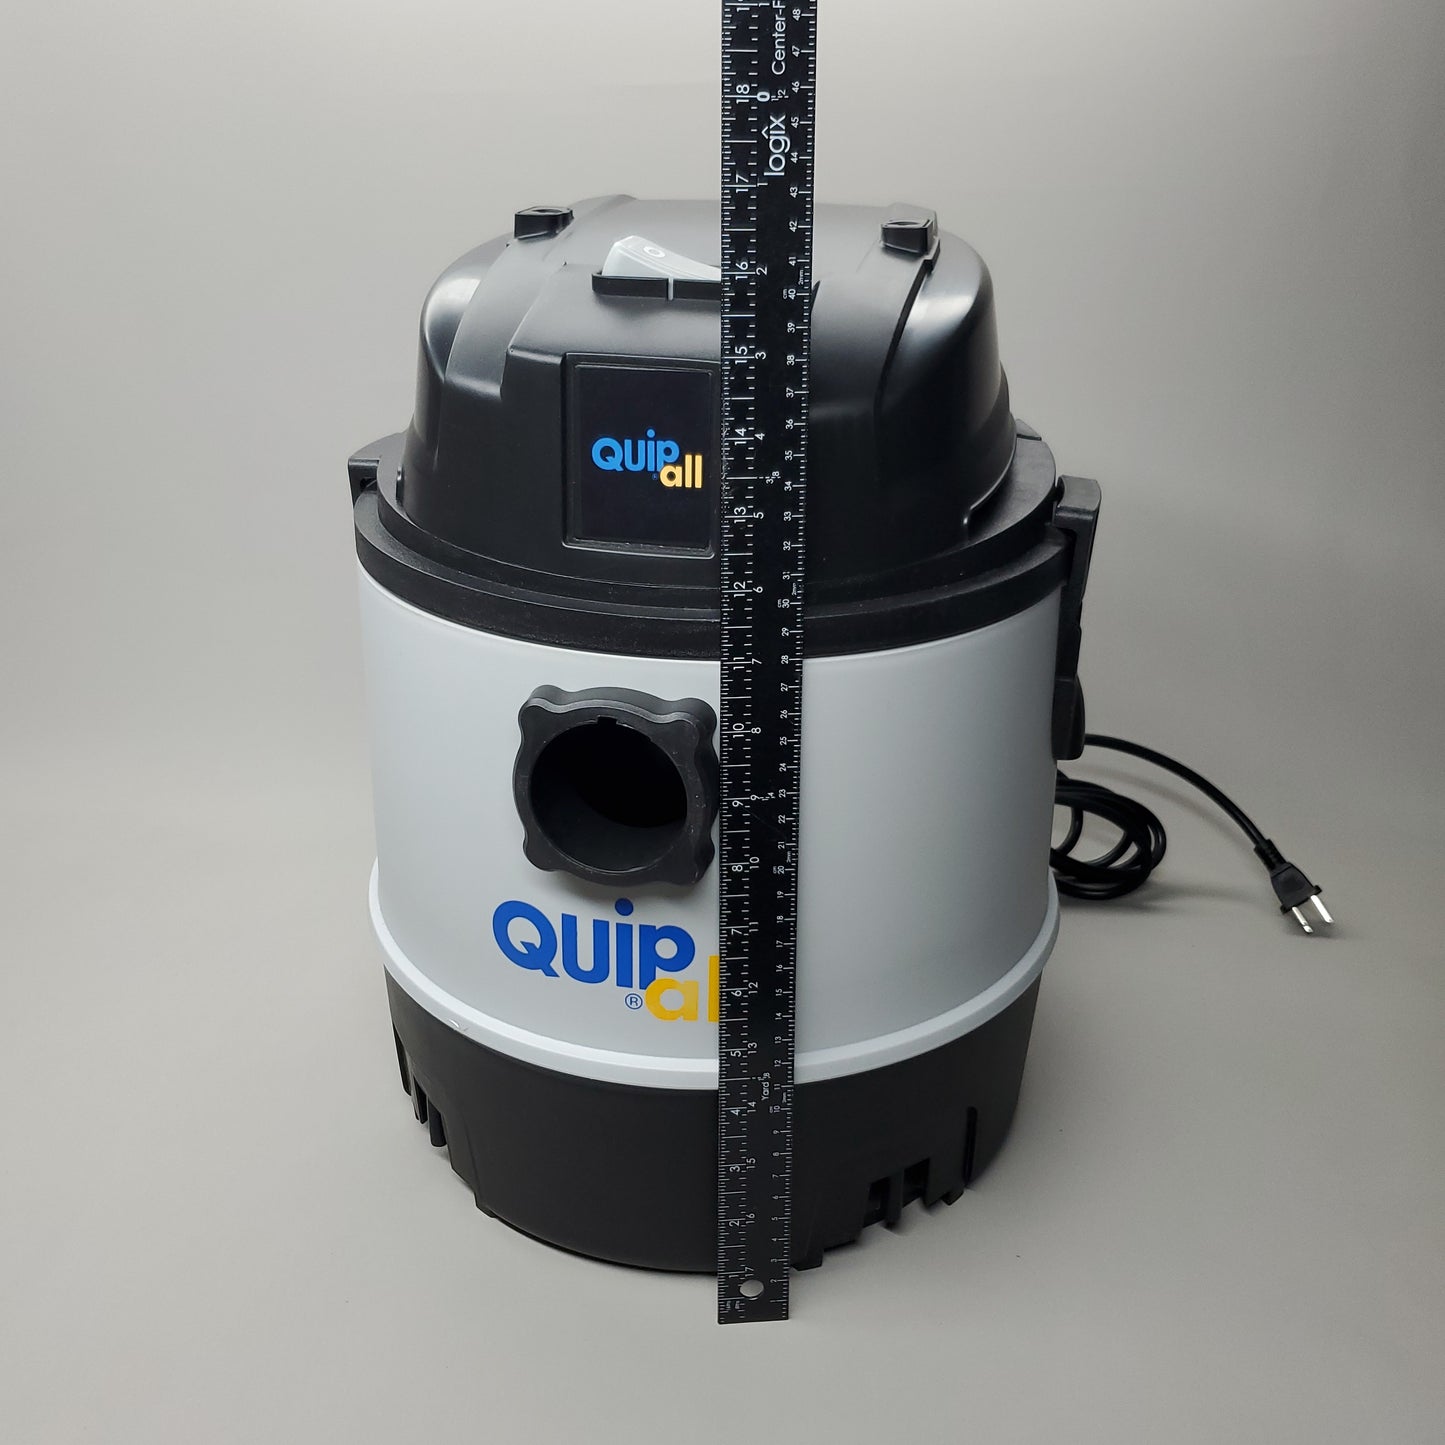 QUIPALL Portable Wet And Dry Vacuum Cleaner 3.2 Gallons Plastic Tank EC813-1000 (New)